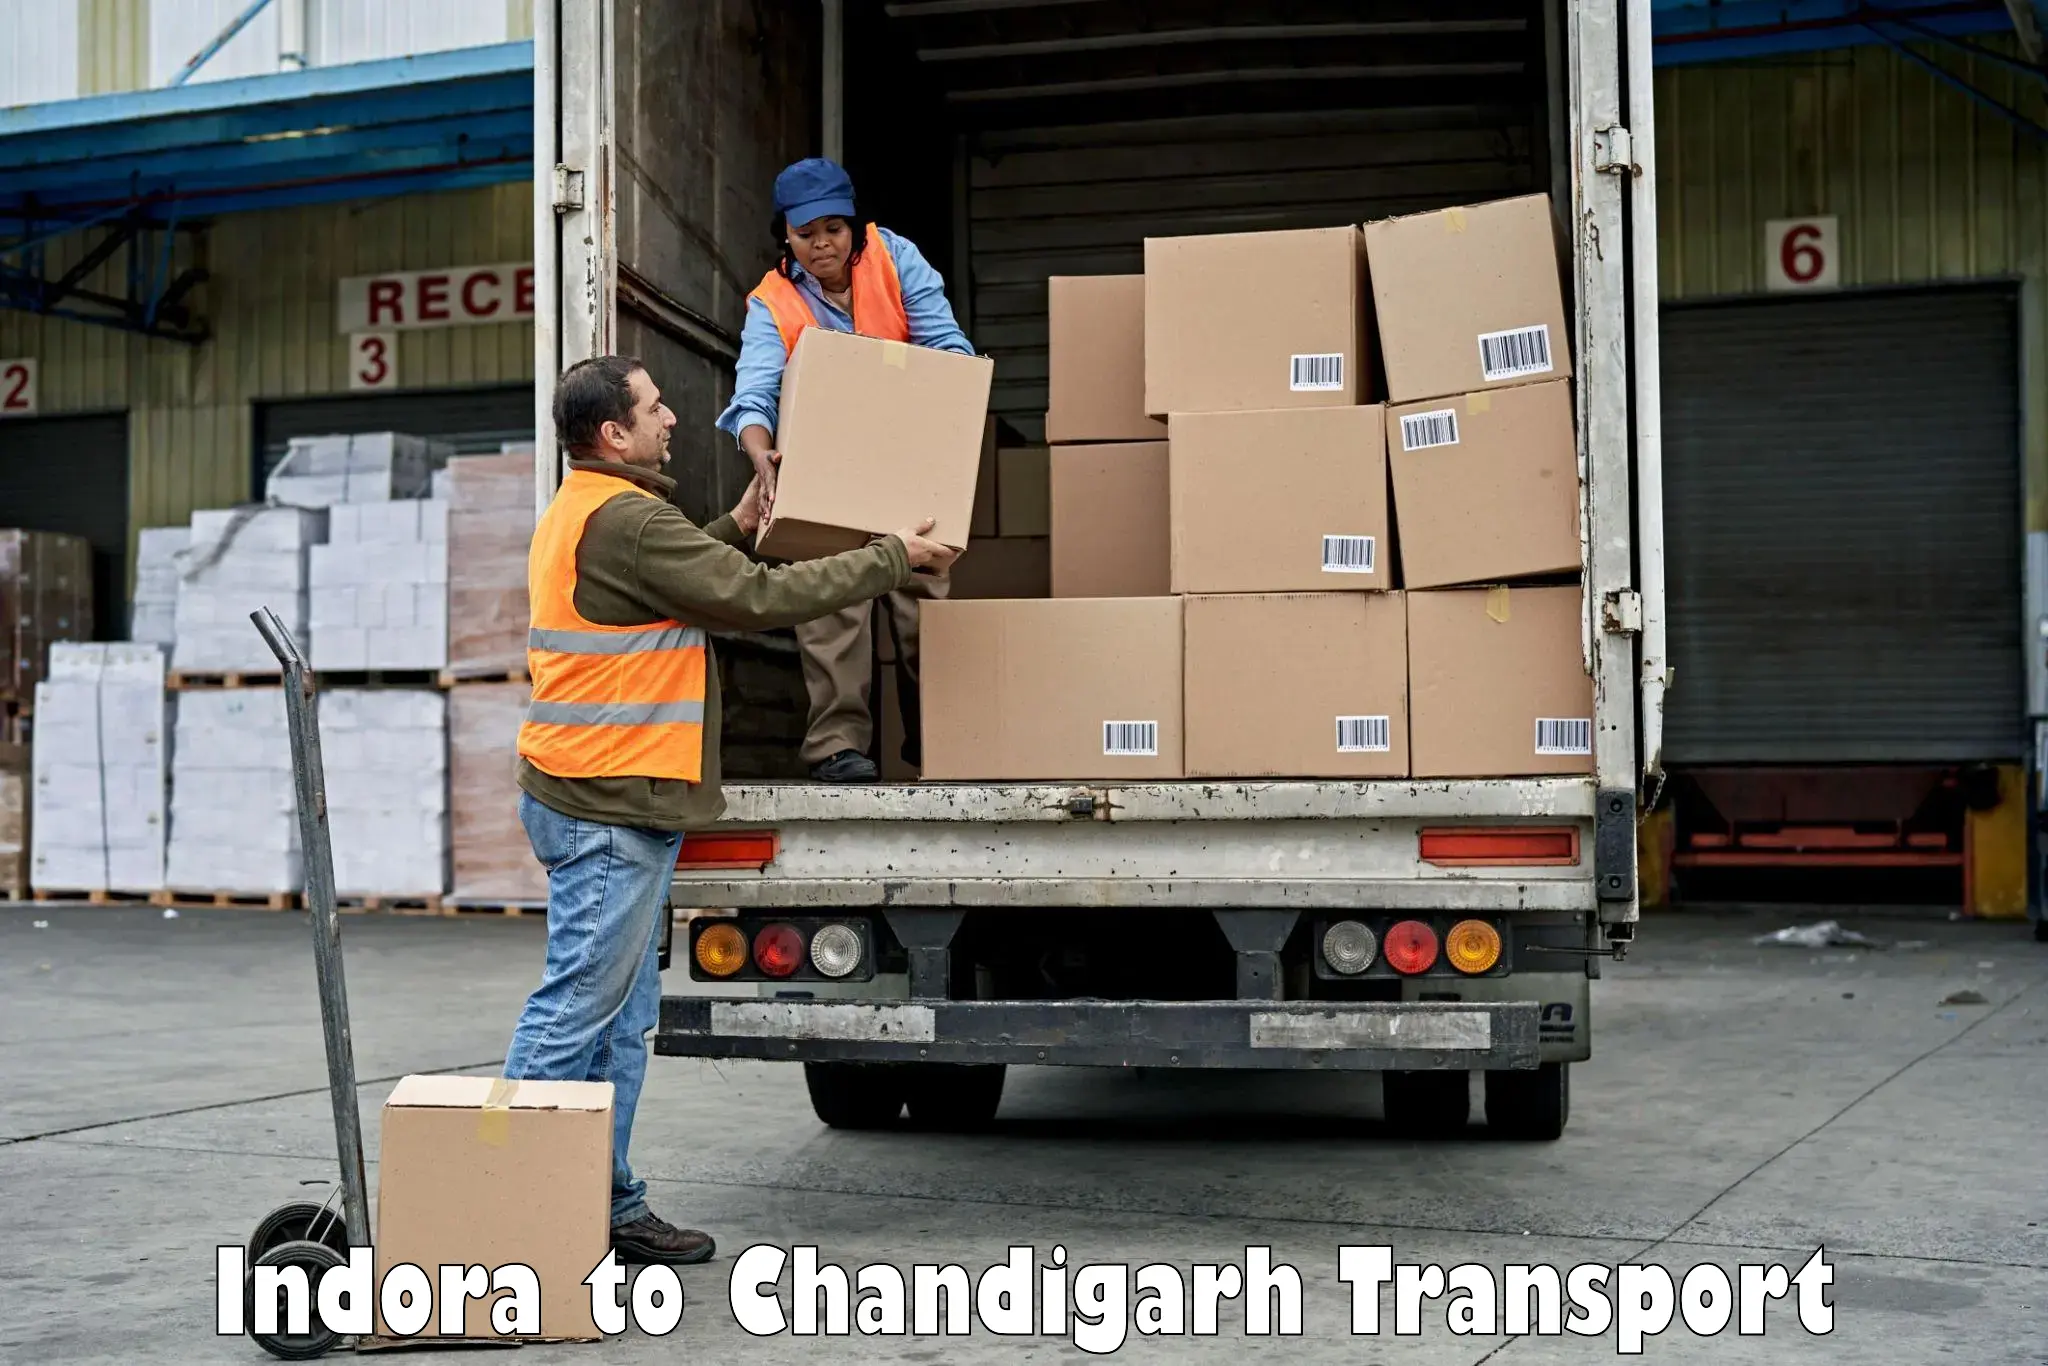 Cycle transportation service Indora to Chandigarh